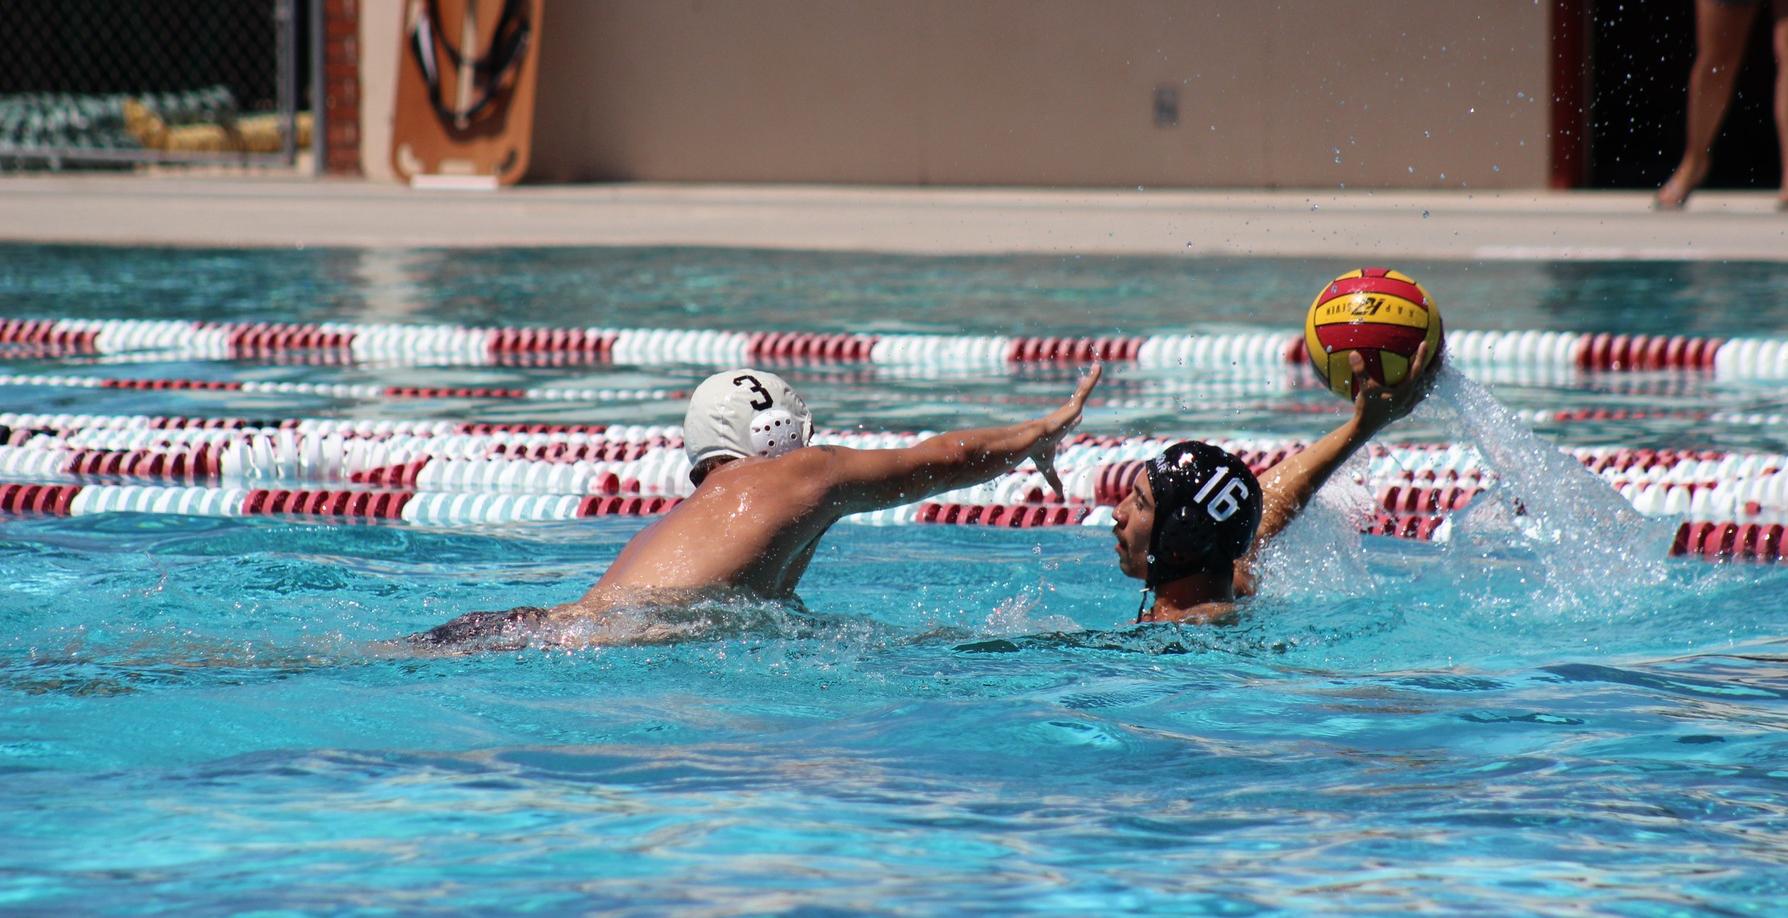 Men's water polo goes 1-3 at Golden West tourney